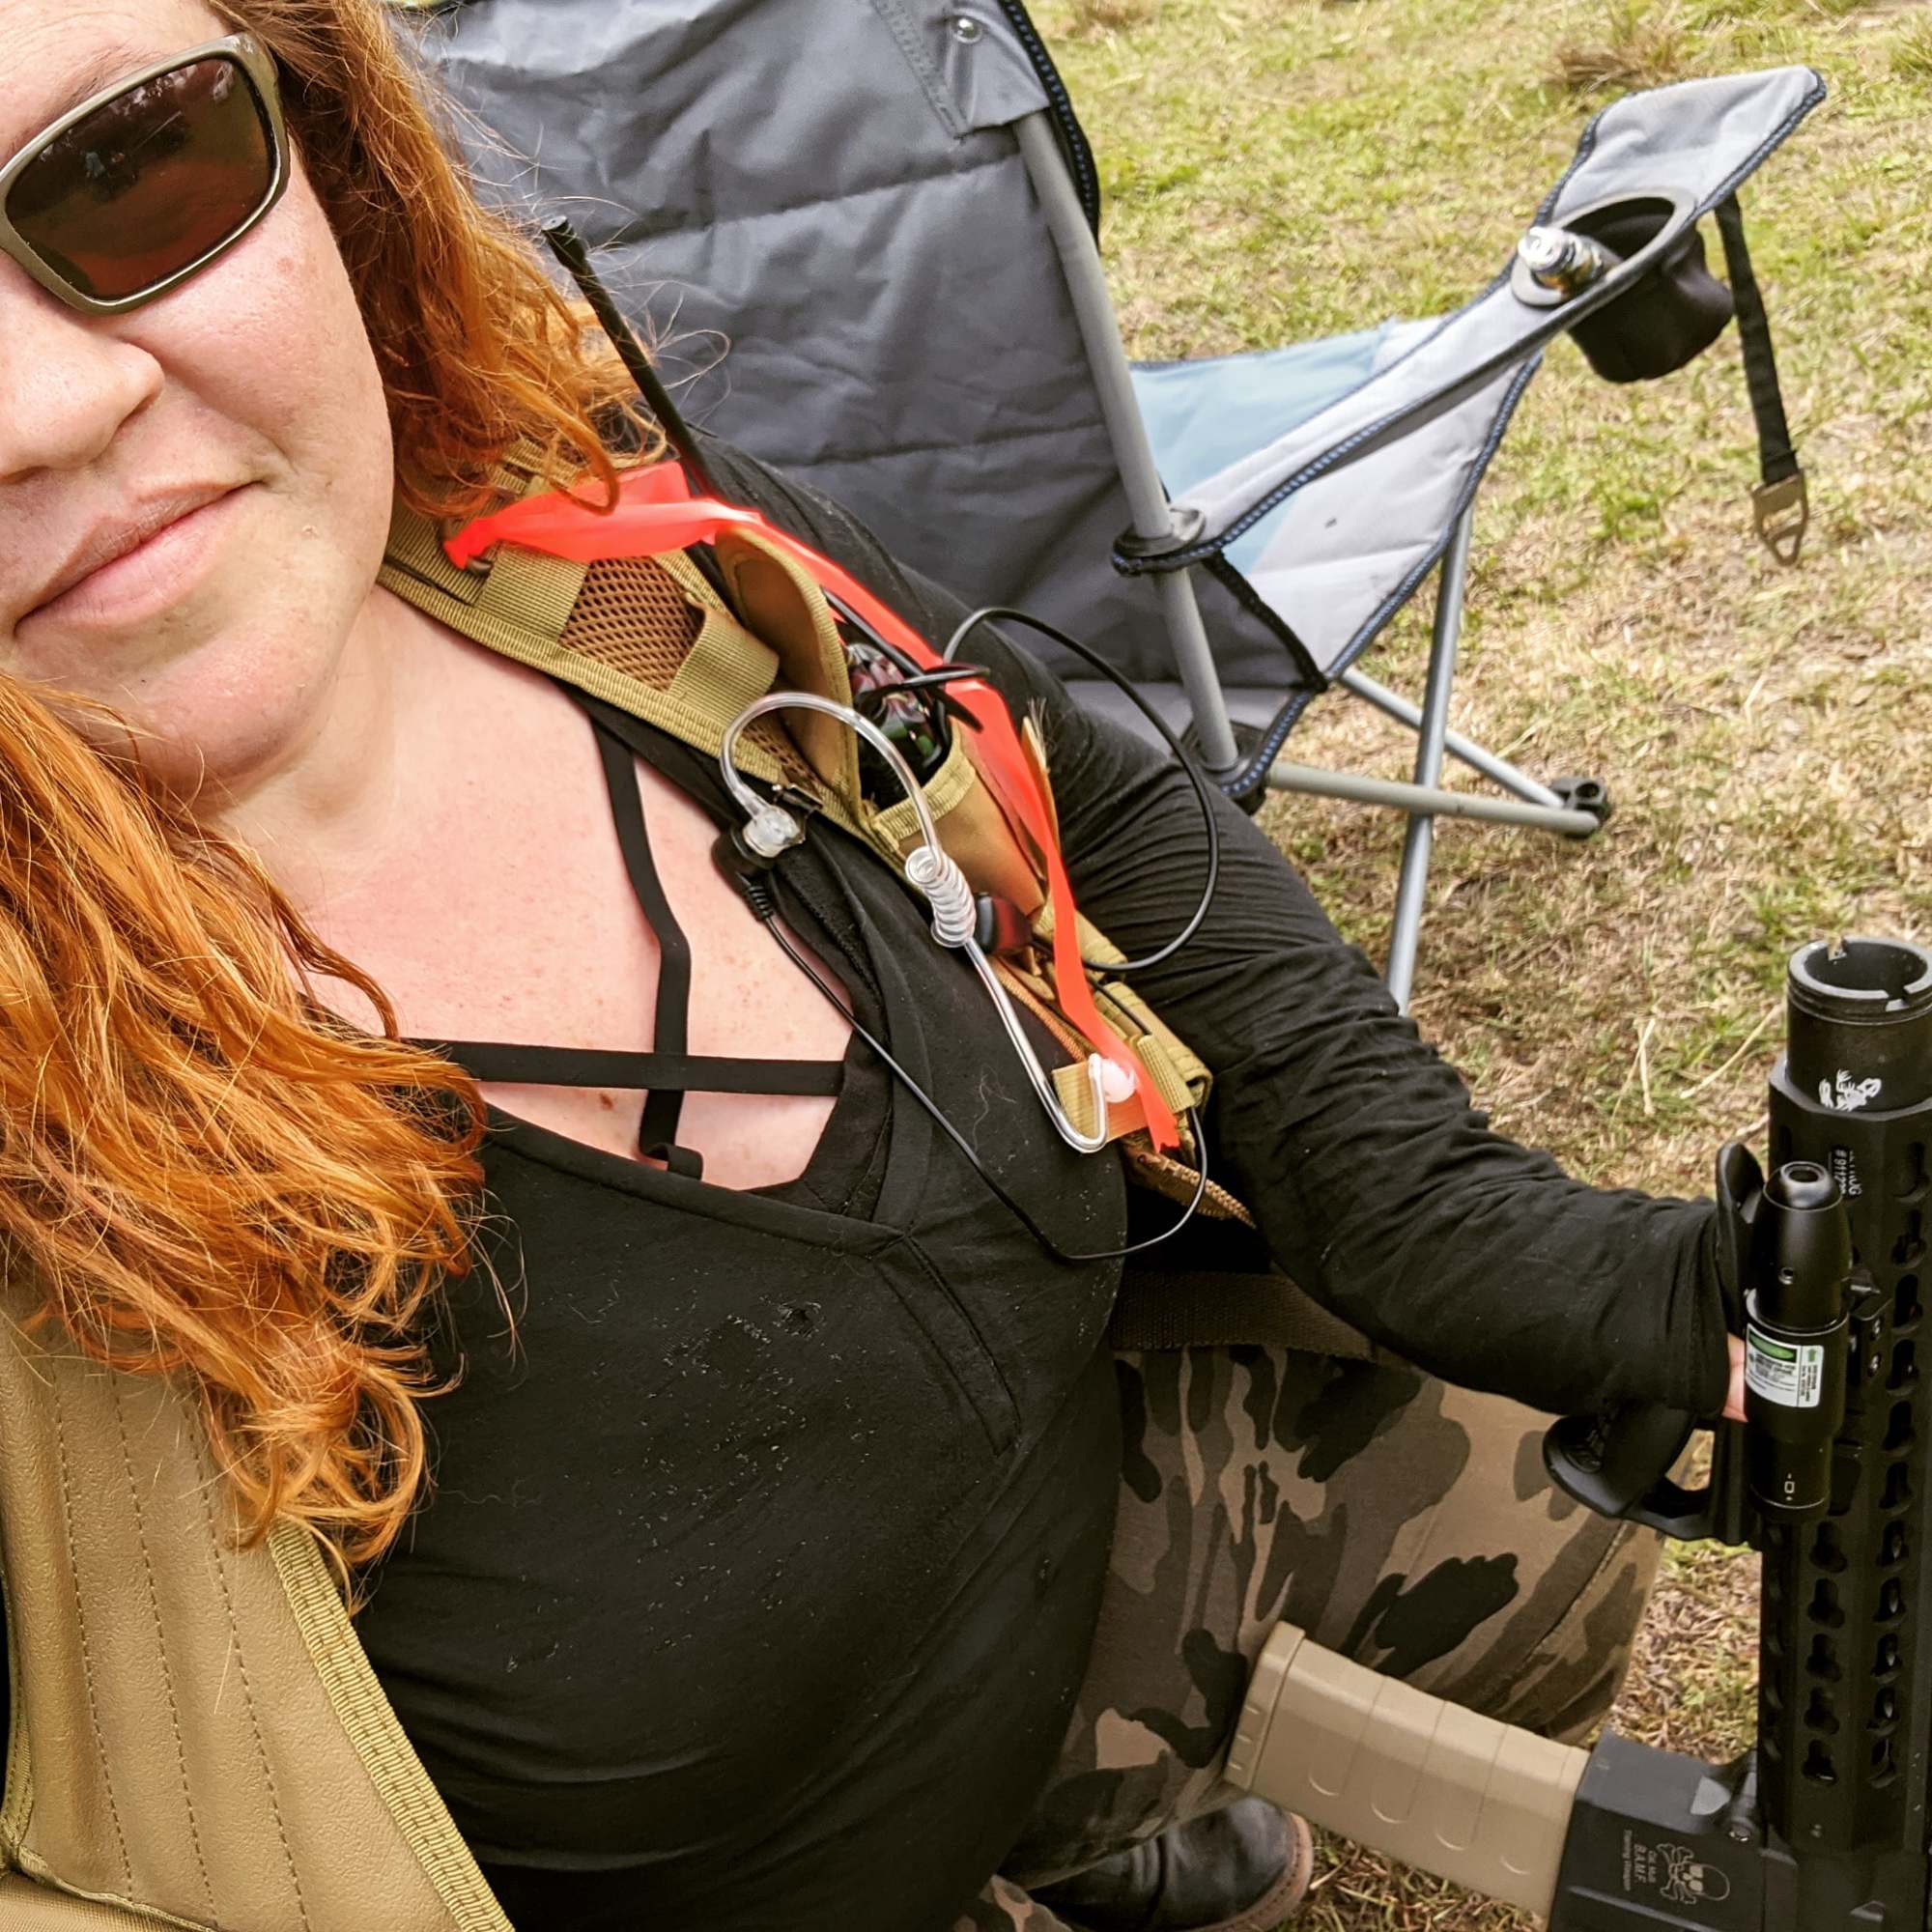 Courtesy. Sarah Kitlowski, president and COO of Sarasota-based Omeza, plays paintball regularly with a group of friends.